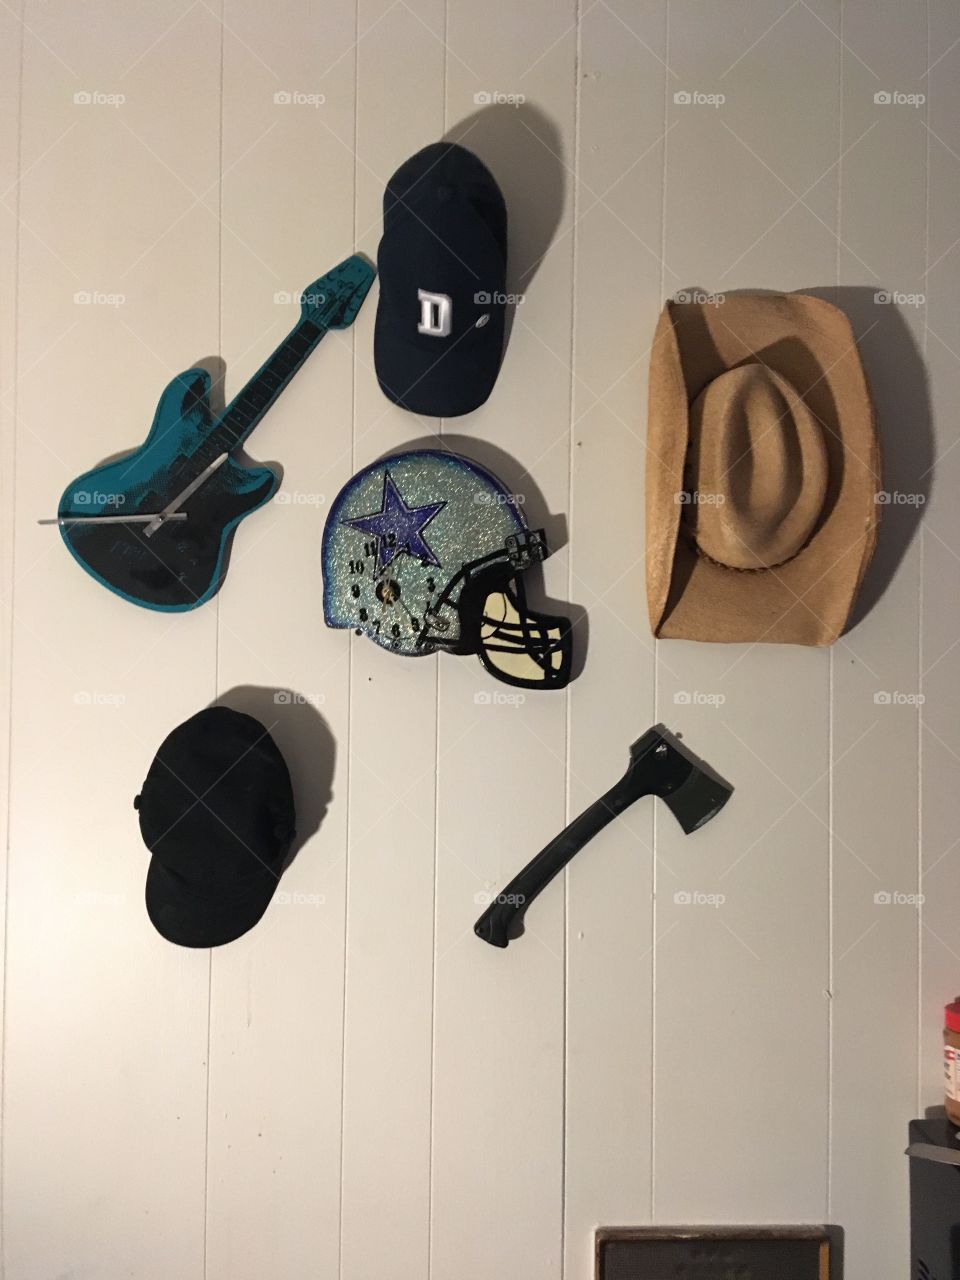 I put this onsomble together while staying at a motel where I was working, I made the Dallas Cowboys clock but the Cowboys hats and hatchet were given to me 